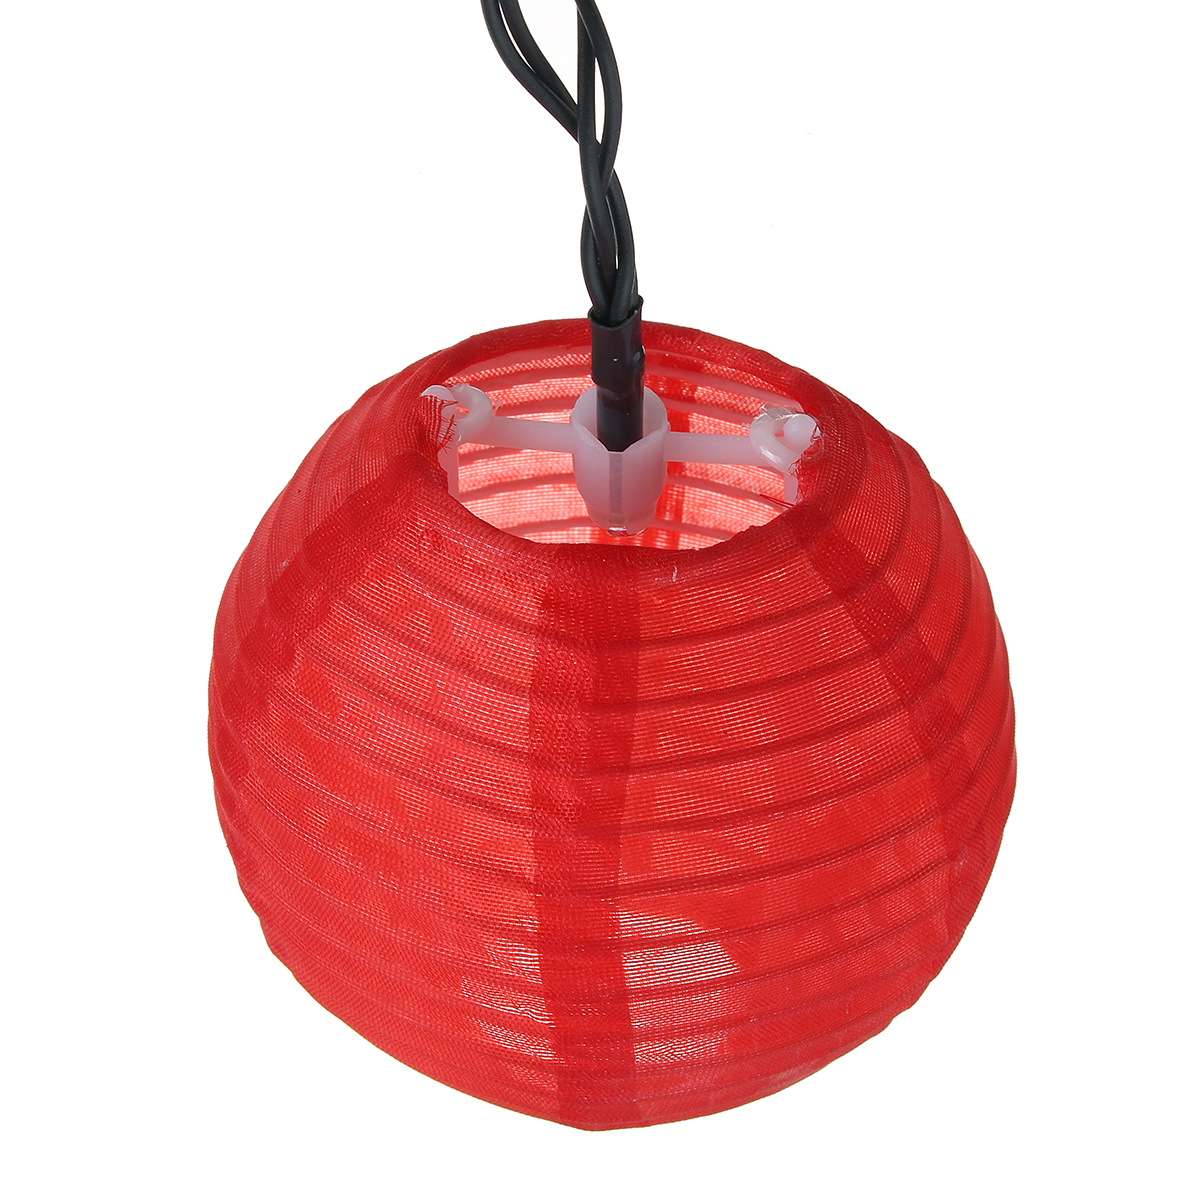 Find 10/20/30/50LED Solar Lantern String Lights Waterproof Garden Lantern String Lights Fair Lights with Fabric Lantern Exterior and Interior Decoration for Christmas Garden Home Yard for Sale on Gipsybee.com with cryptocurrencies